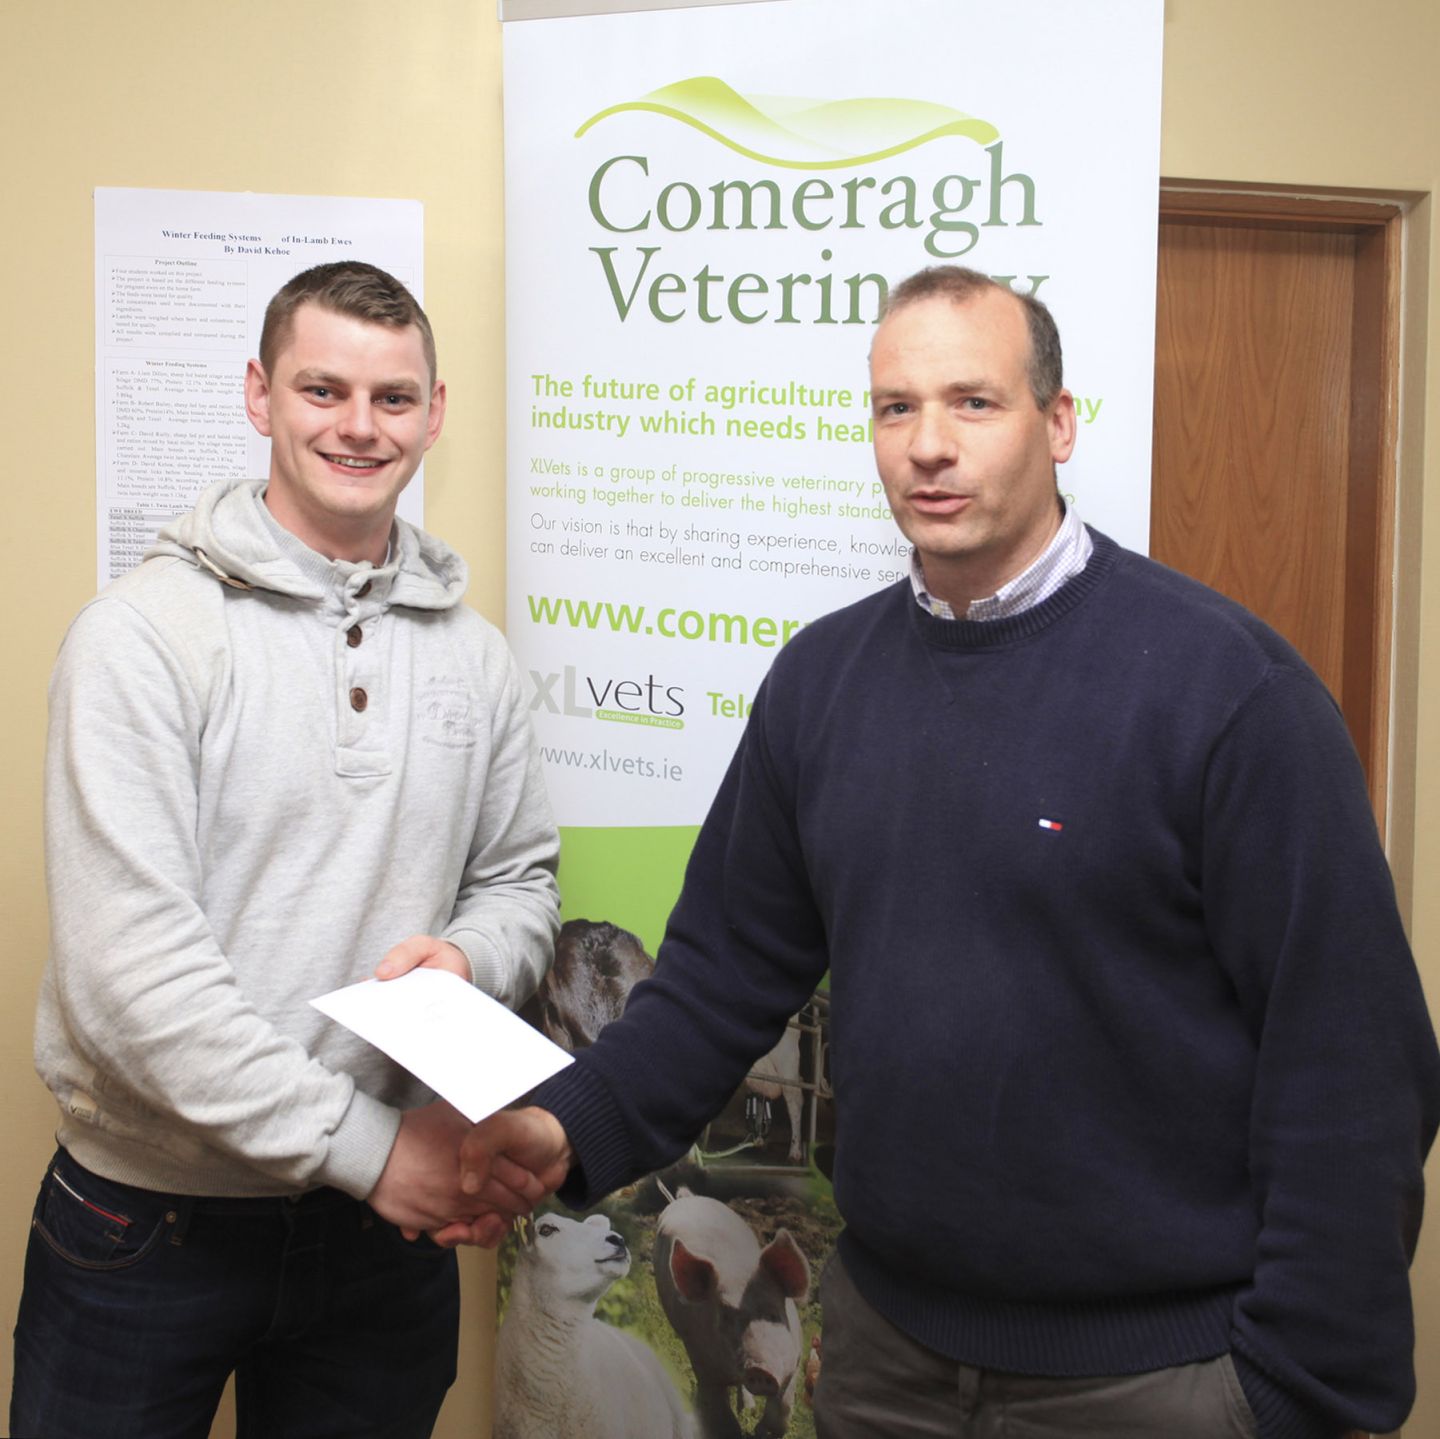 Comeragh Vets' final year project poster award for BSc in Agriculture students